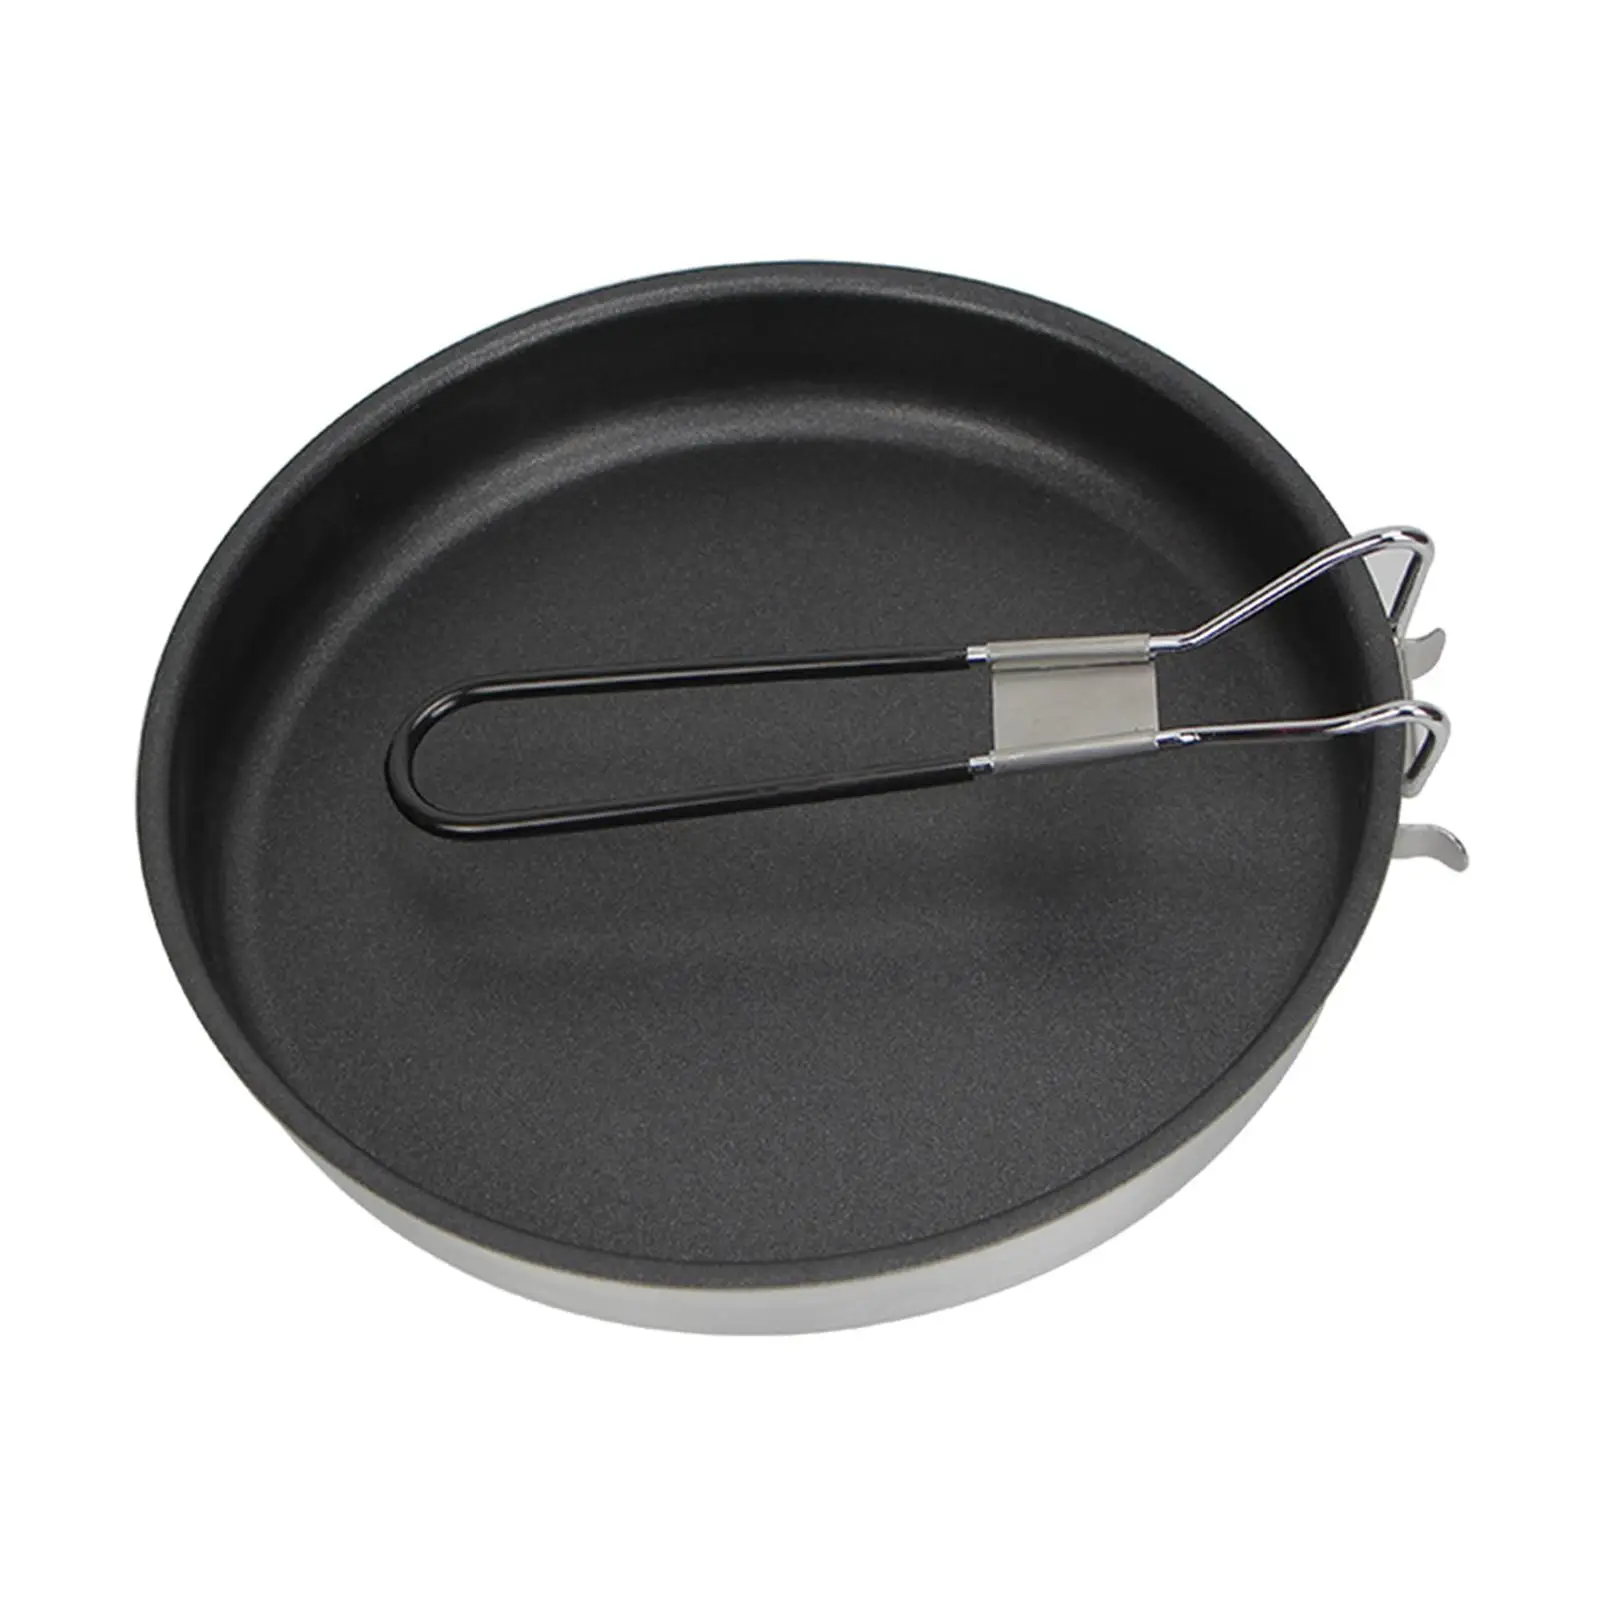 Portable Frying Pan Camping Cookware Folding Pot Lightweight Storage Folding Handle Cooker Equipment for Outdoor Fishing Picnic